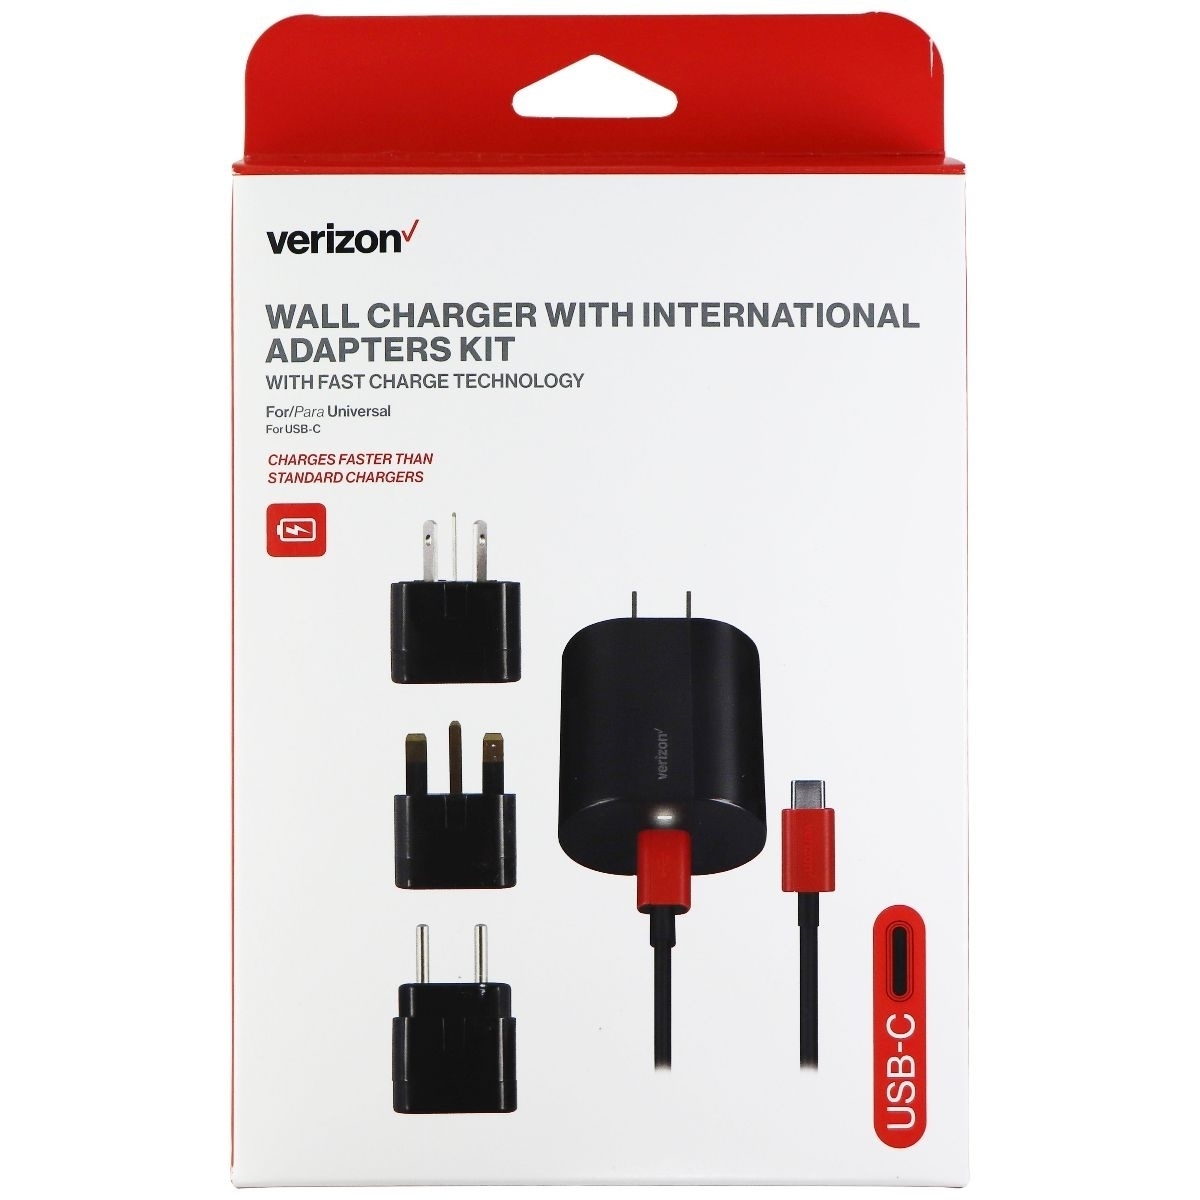 Verizon Wall Charger With International Adapters Kit For USB-C Devices - Black